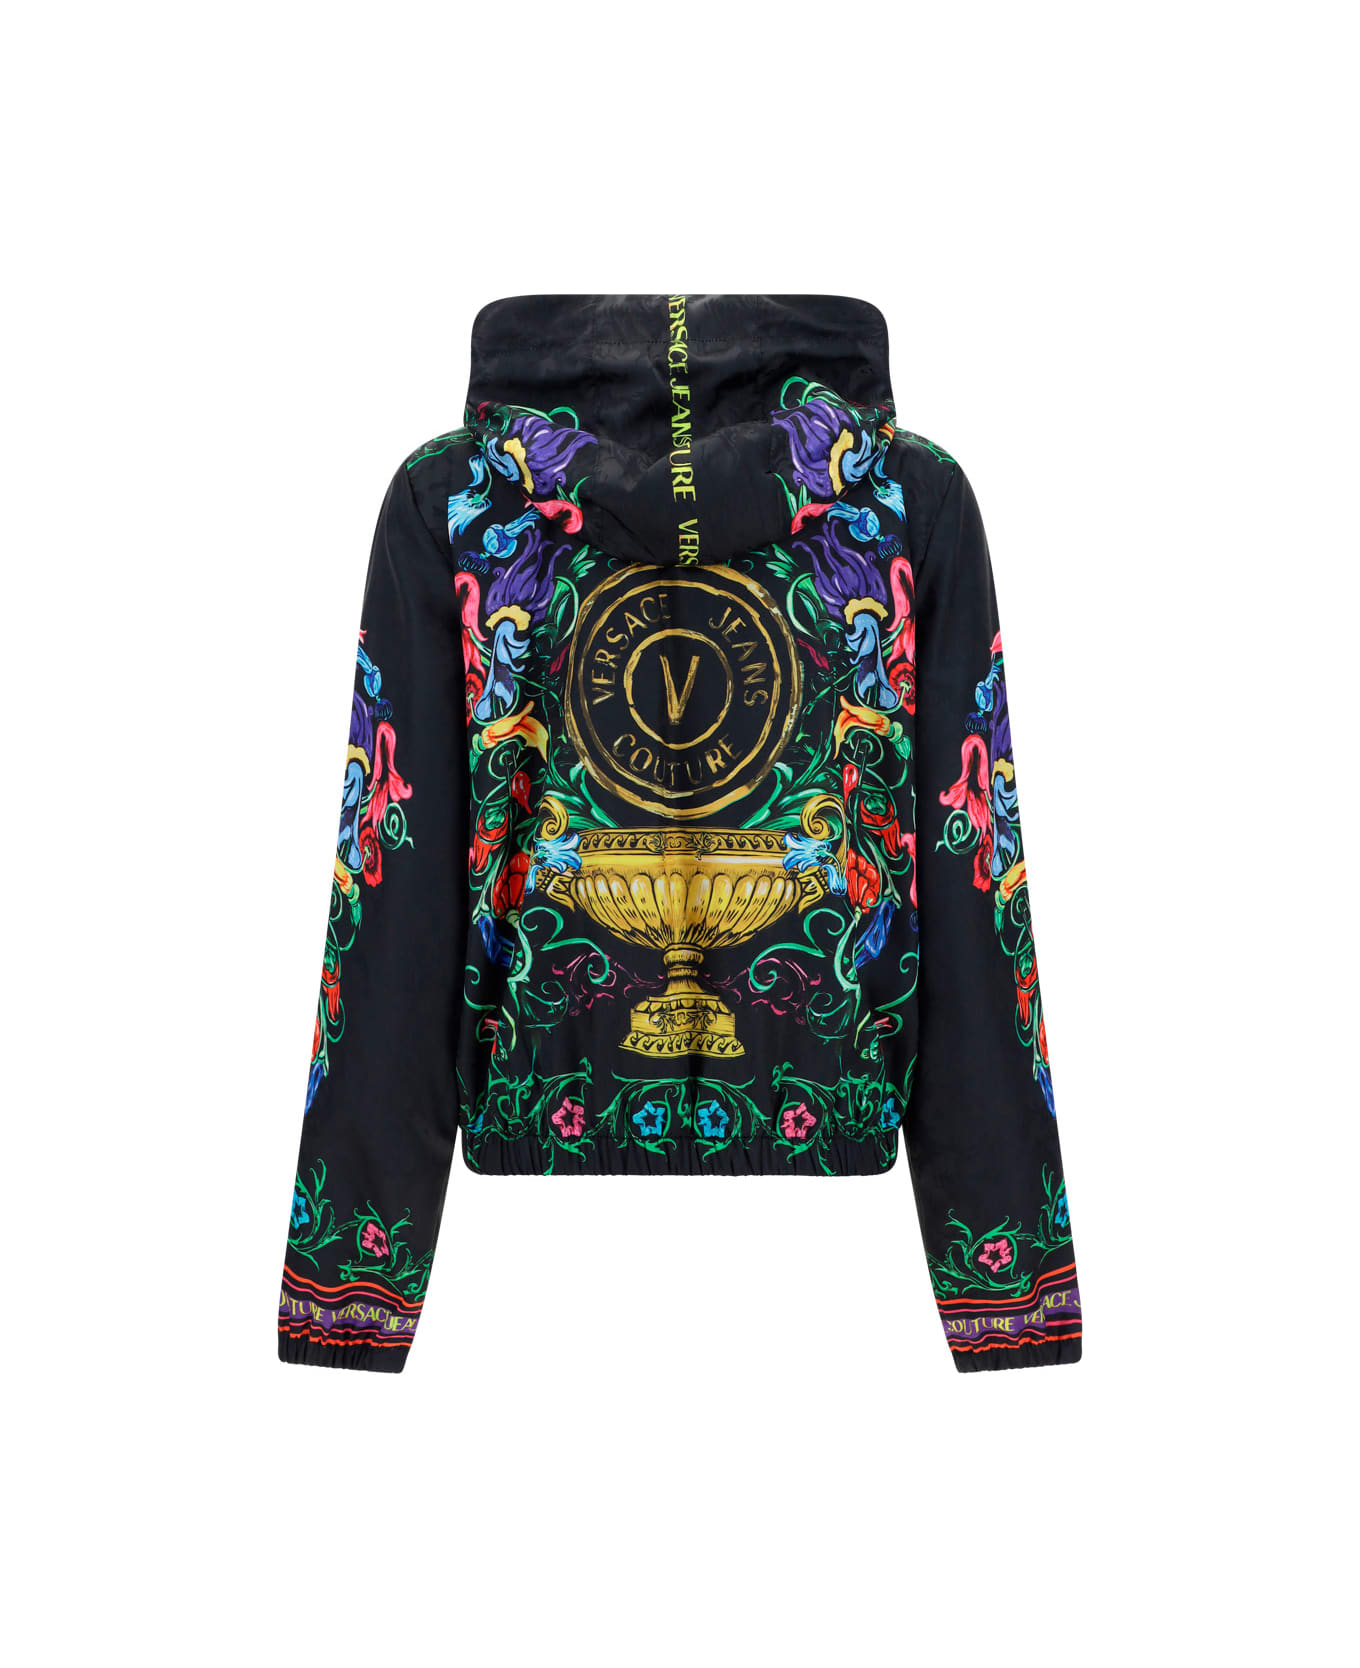 Versace Jeans Couture Outerwear - Black/gold